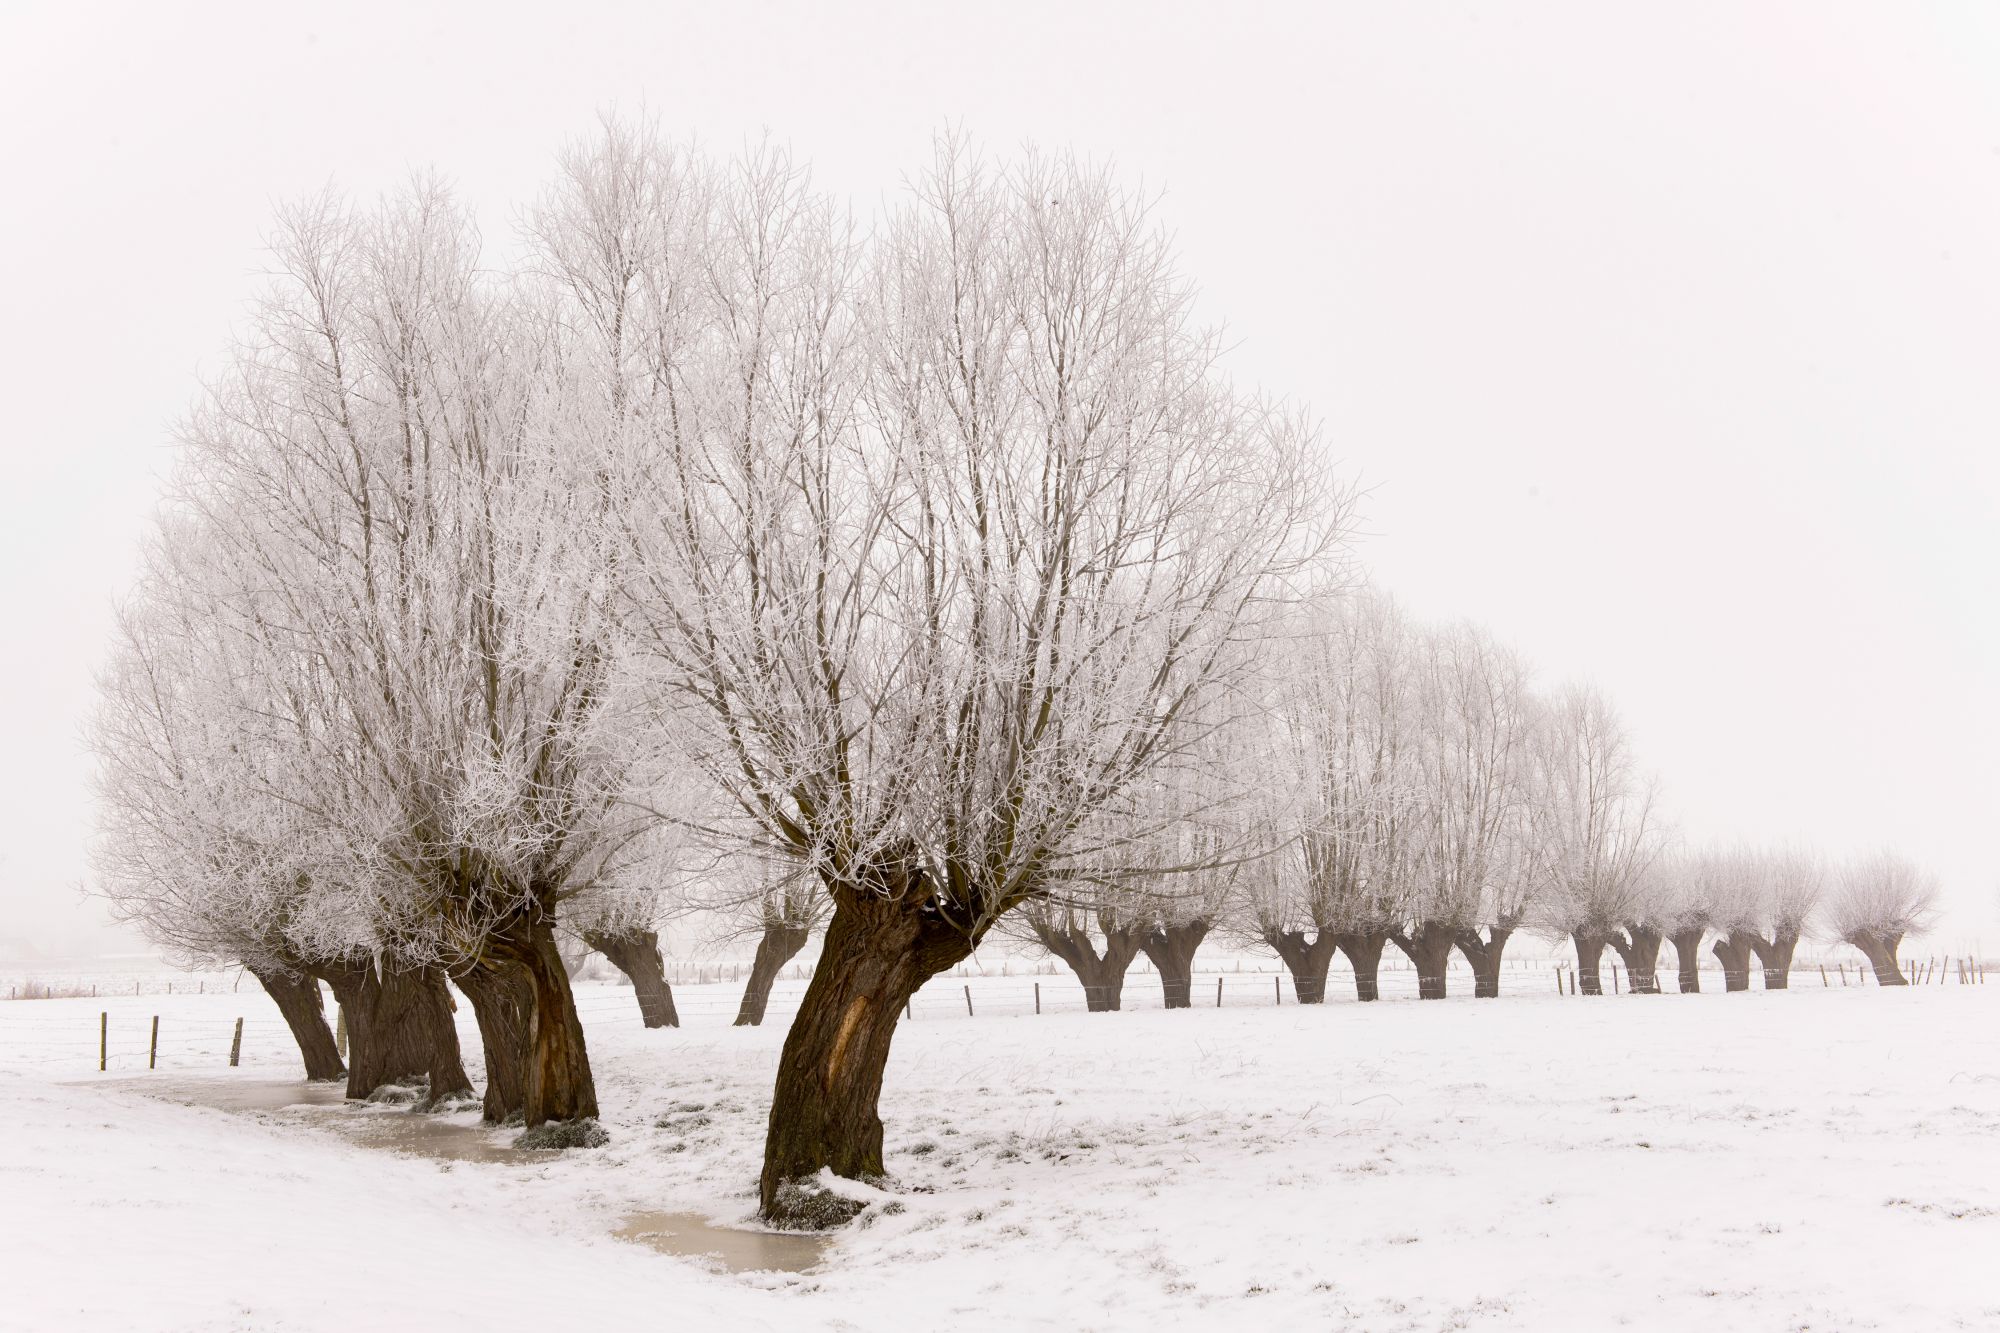 Willows in winter